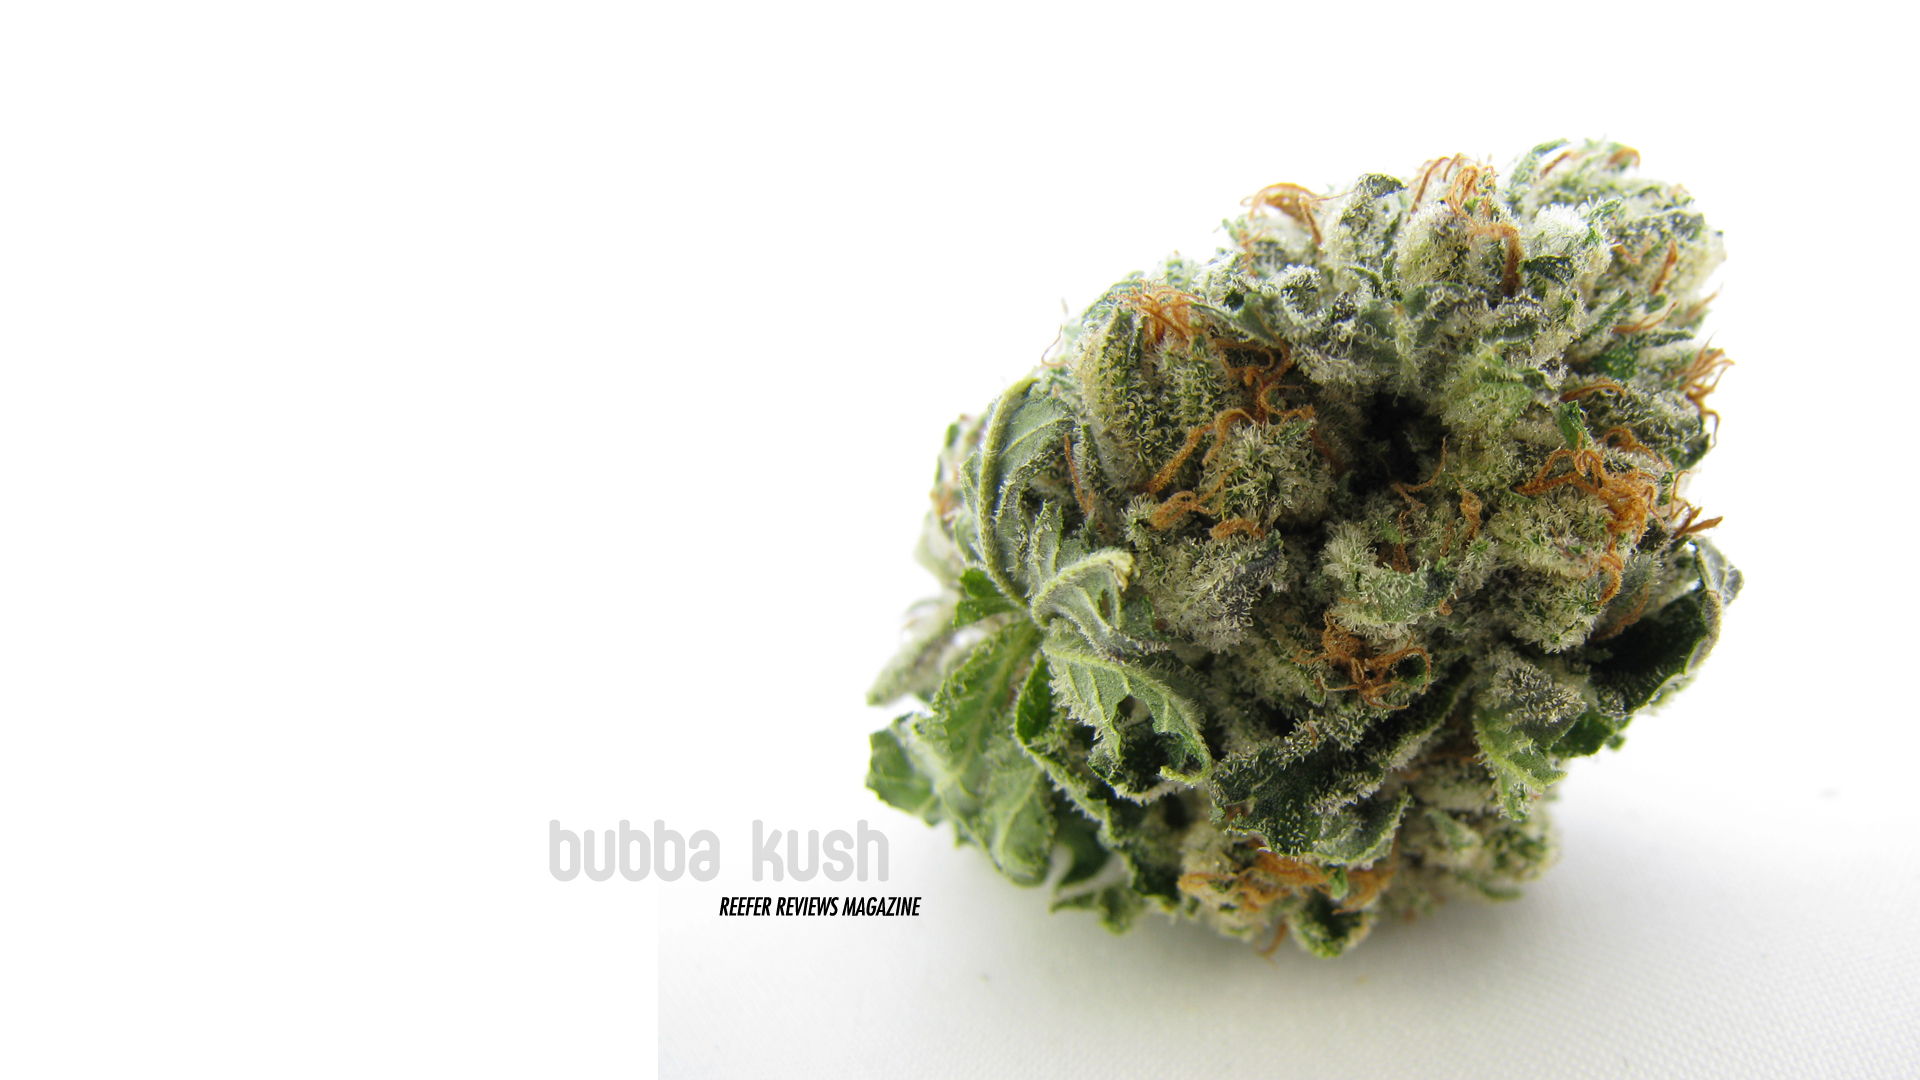 Wallpapers Kush Below To The Latest From Reefer Reviews Magazine ...